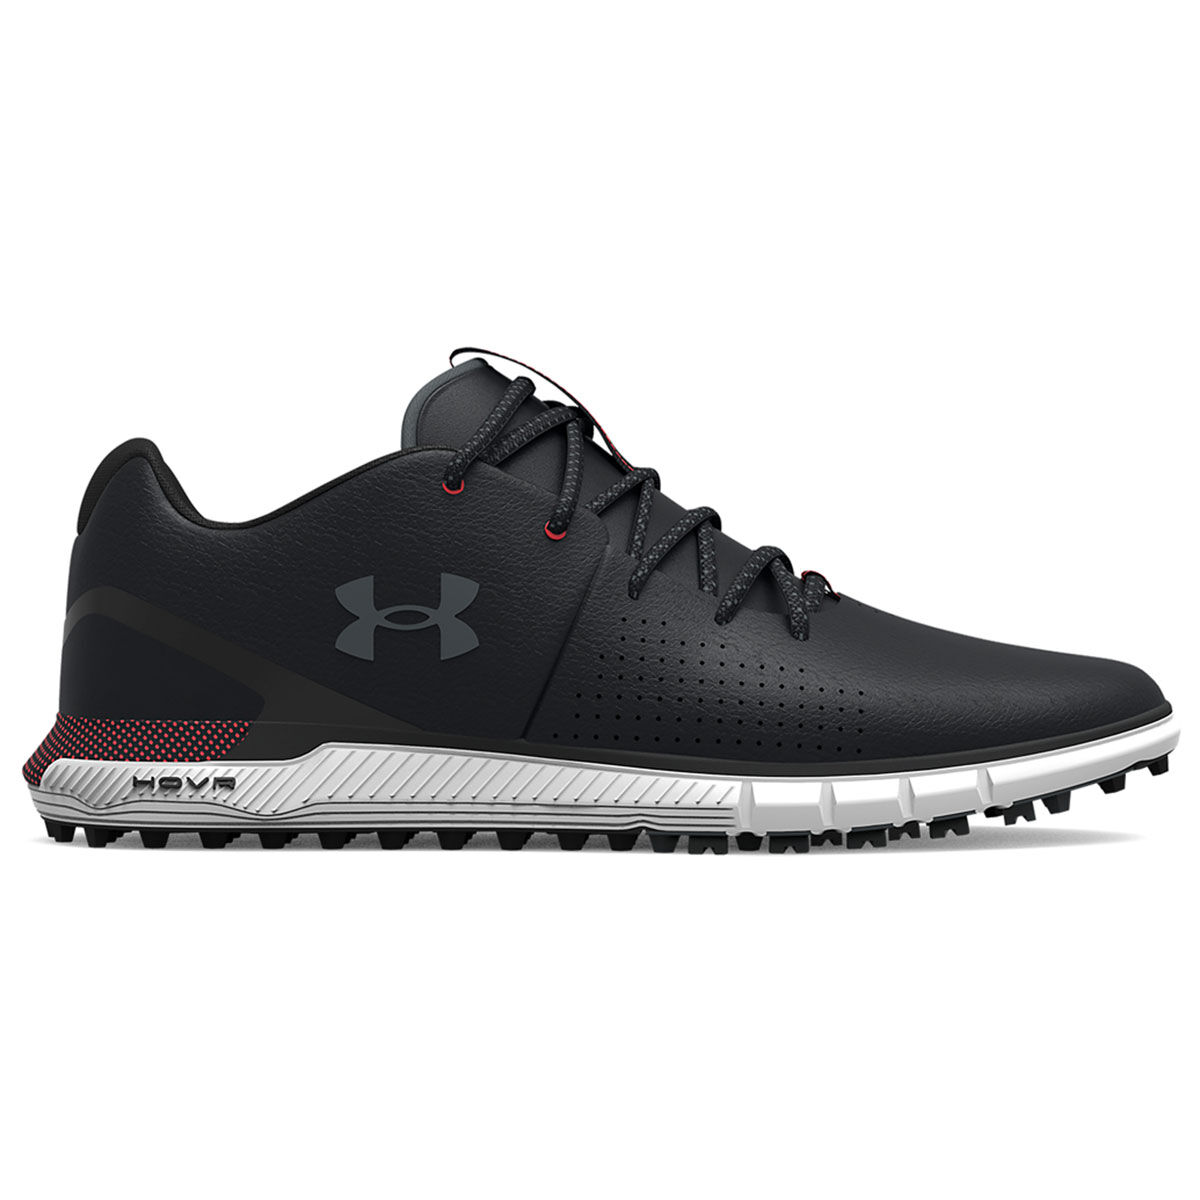 Under Armour Men’s HOVR Fade 2 Wide Spikeless Golf Shoes, Mens, Black/black/black, 11 | American Golf